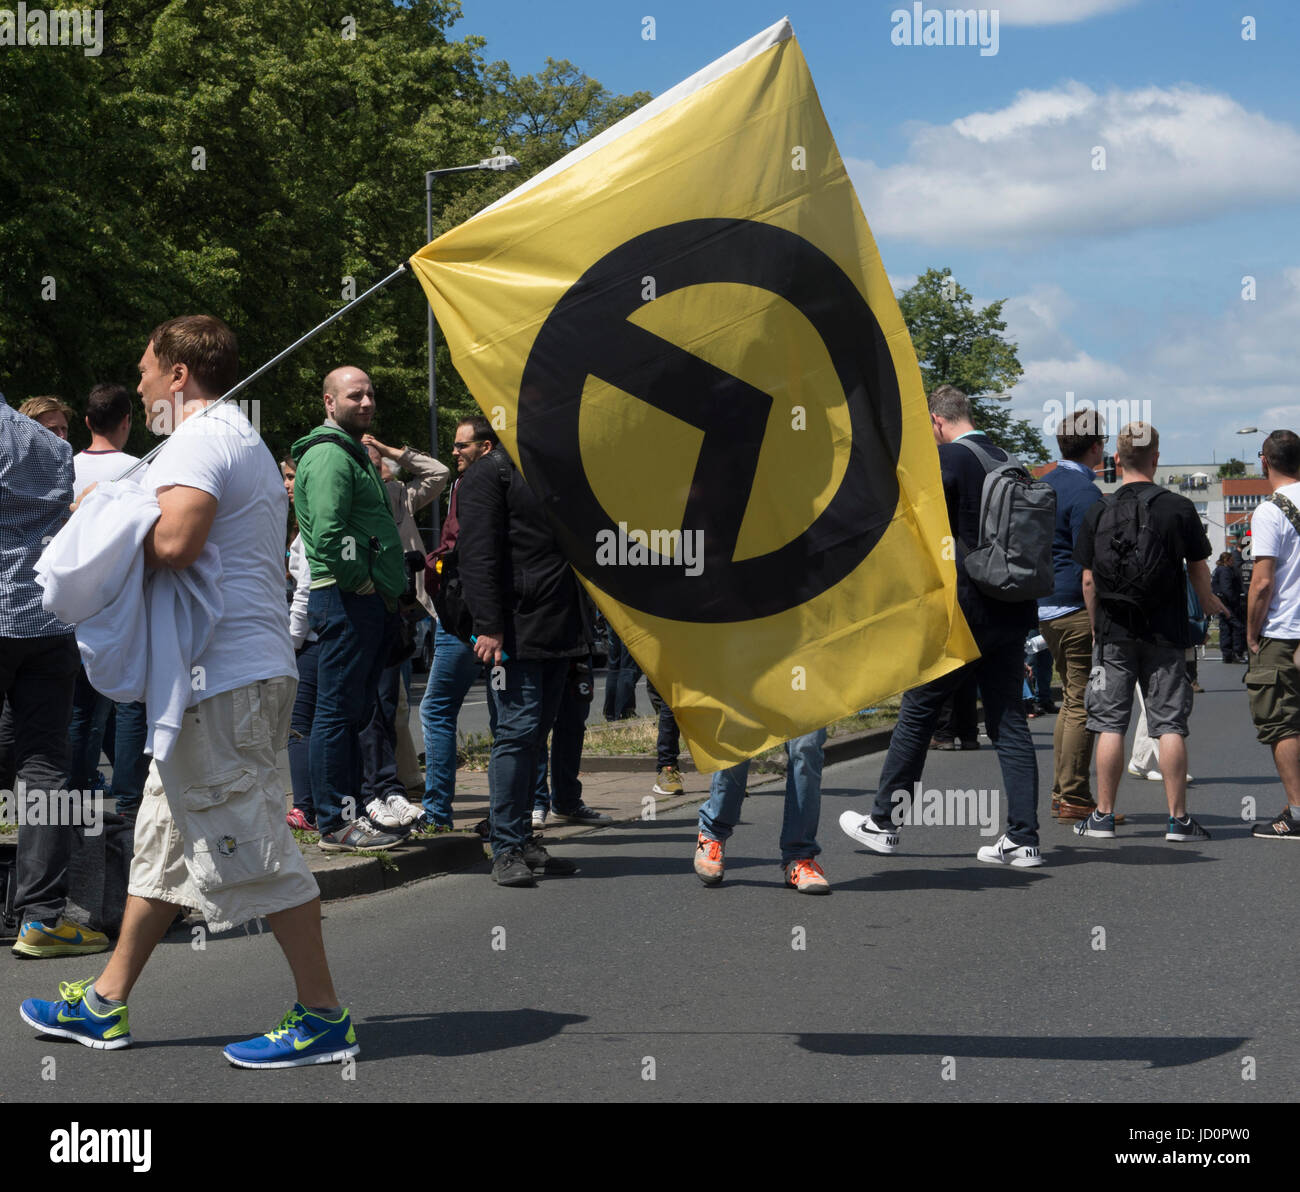 Berlin, Germany. 17th June, 2017. A supporter of the right-wing 'Identitaere Bewegung' (lit. identitarian movement) with a flag on Brunnenstrasse in Berlin, Germany, 17 June 2017. Various groups protested against a demonstration by the right-wing group. Photo: Paul Zinken/dpa/Alamy Live News Stock Photo